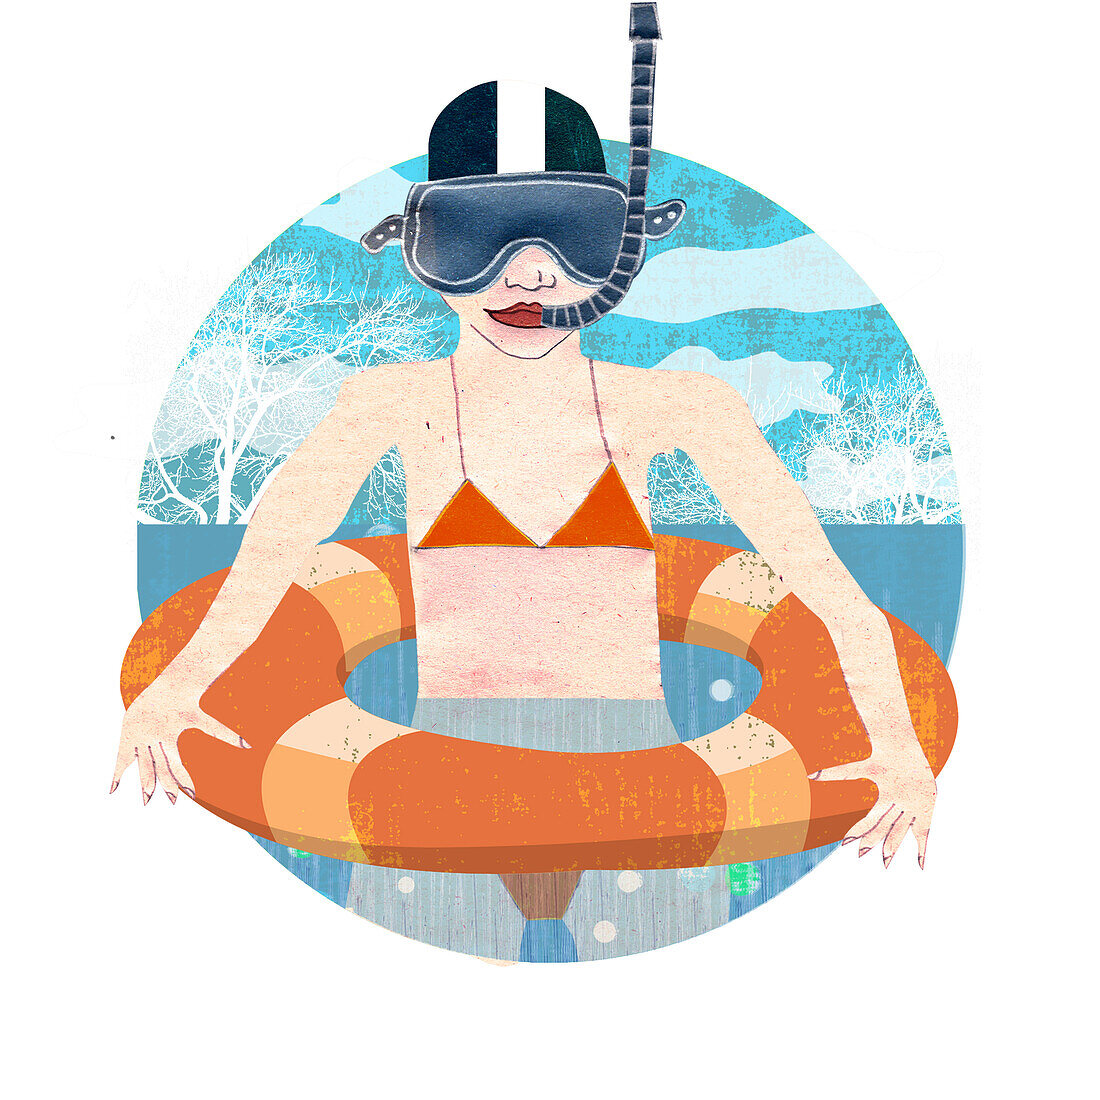 Woman wearing goggles swimming with a lifebuoy, illustration